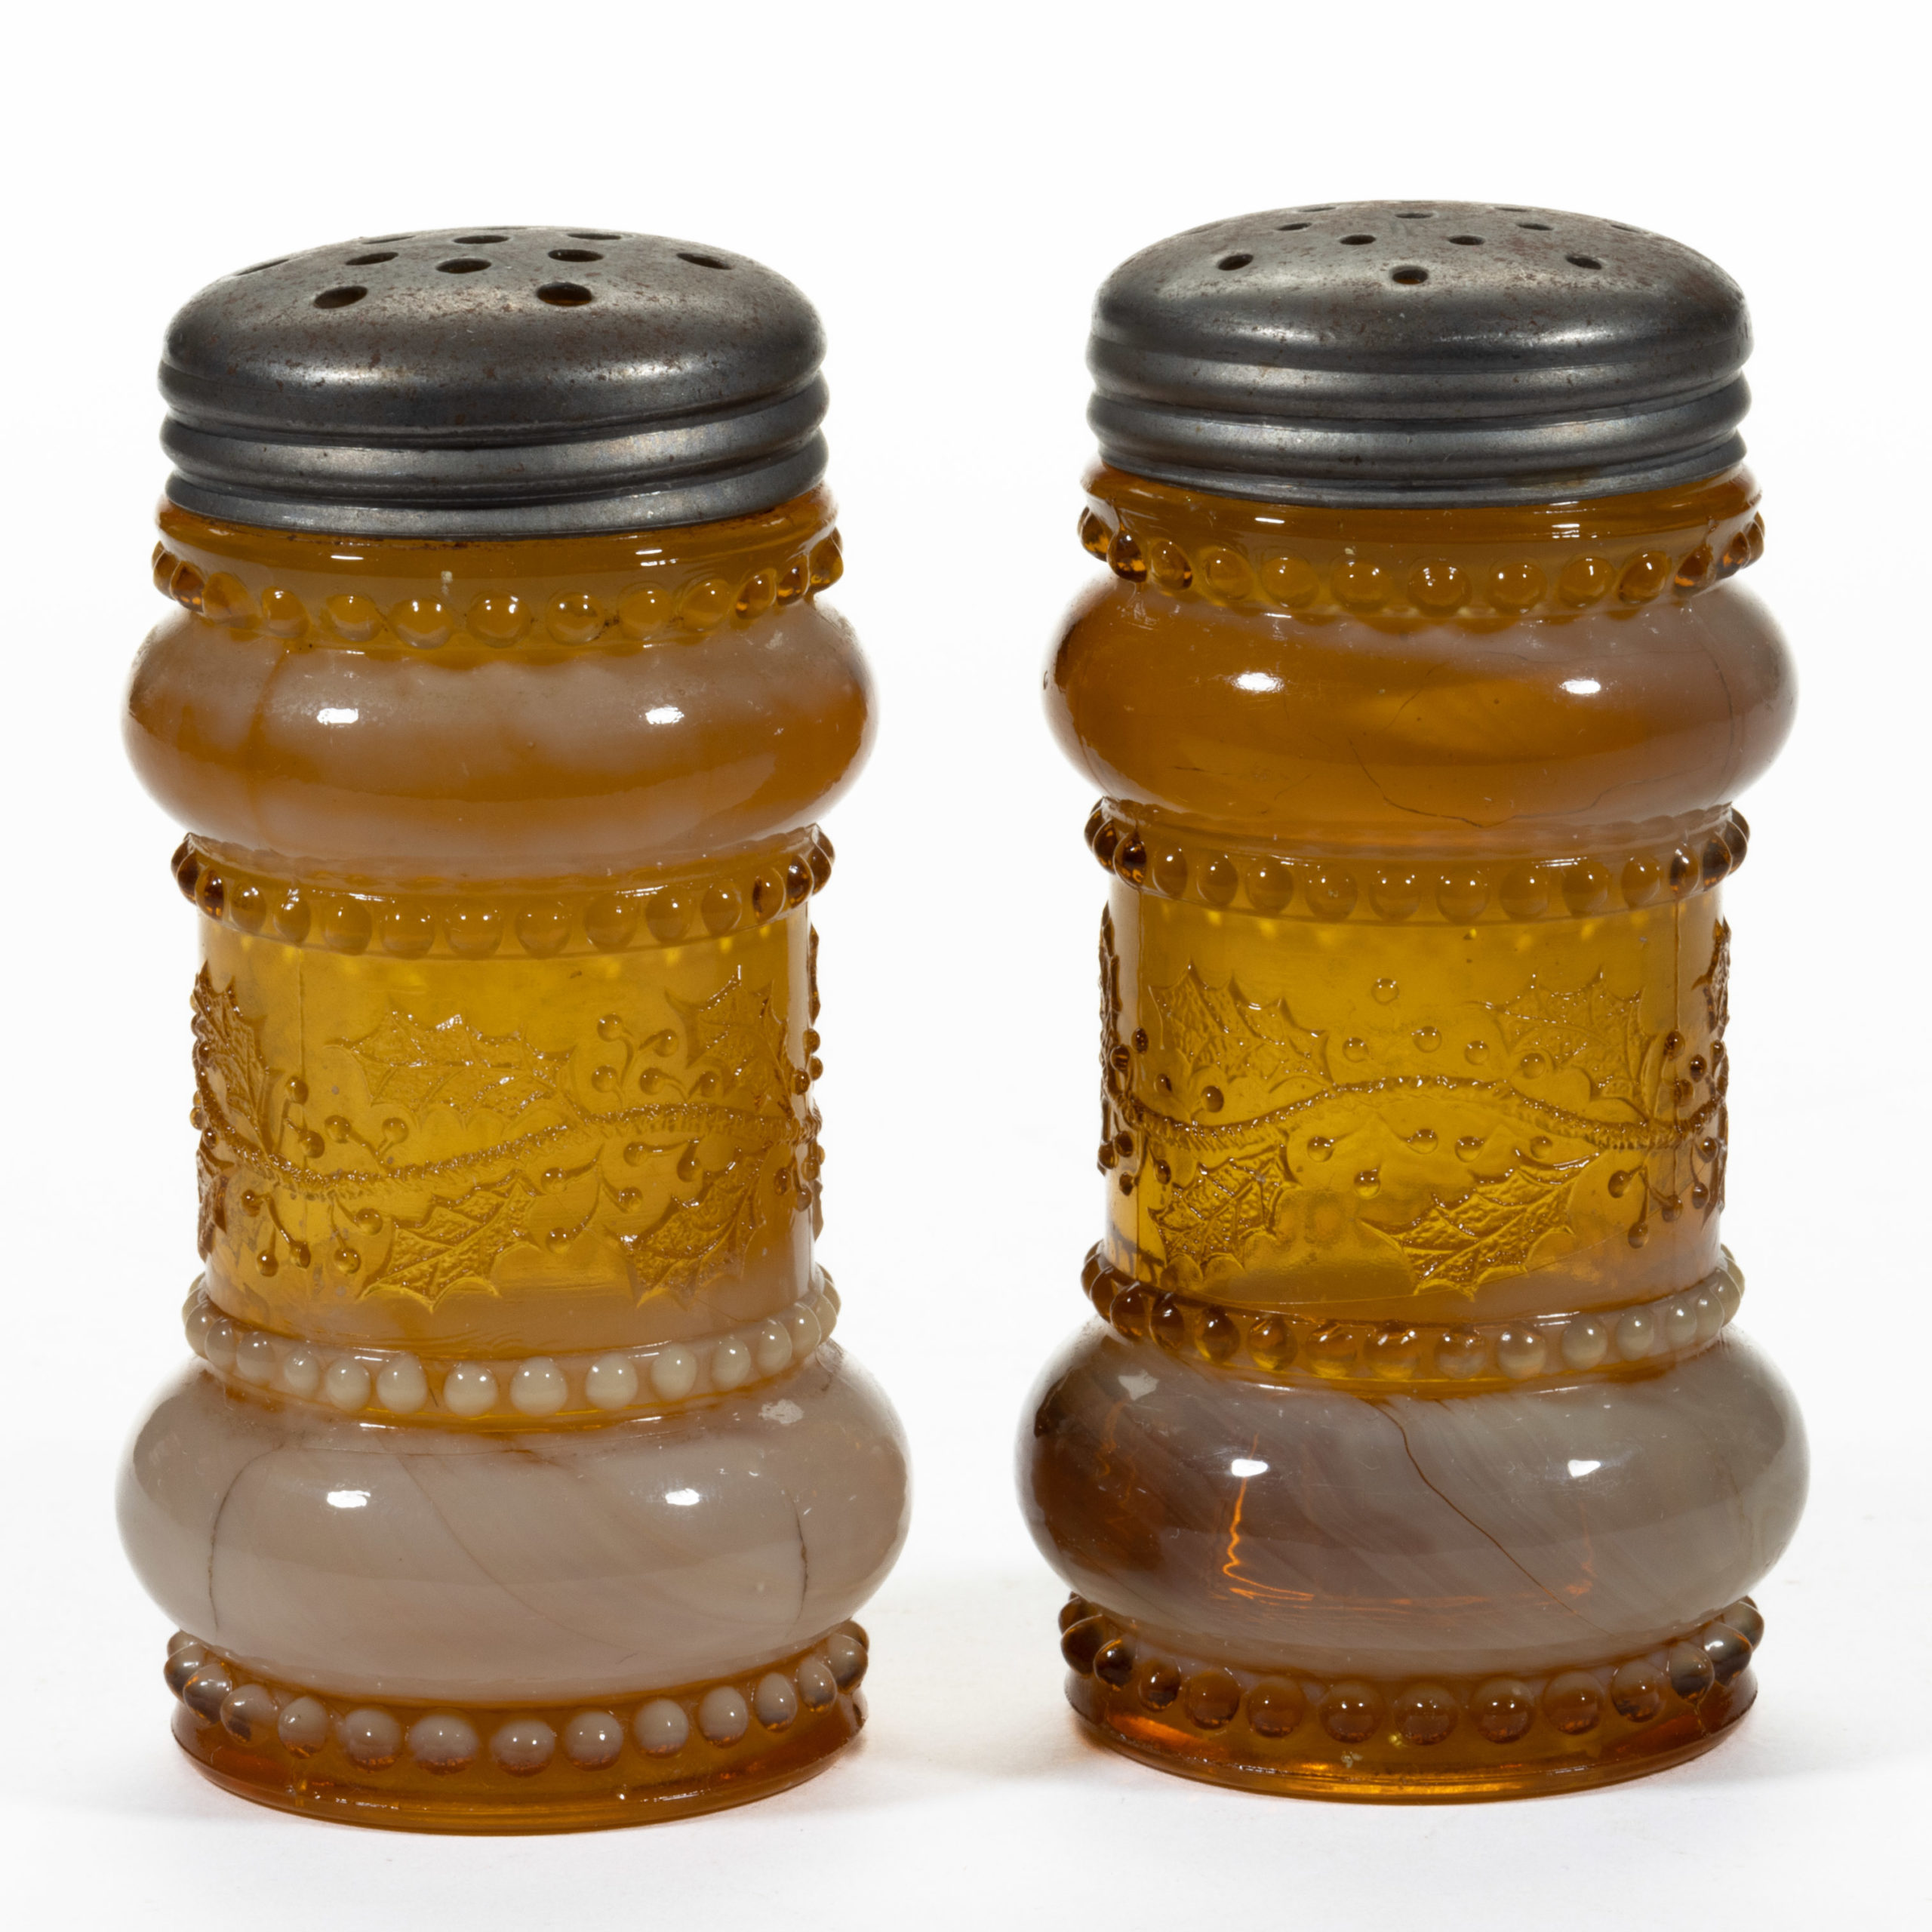 GREENTOWN NO. 450 / HOLLY AMBER SALT AND PEPPER SHAKER,